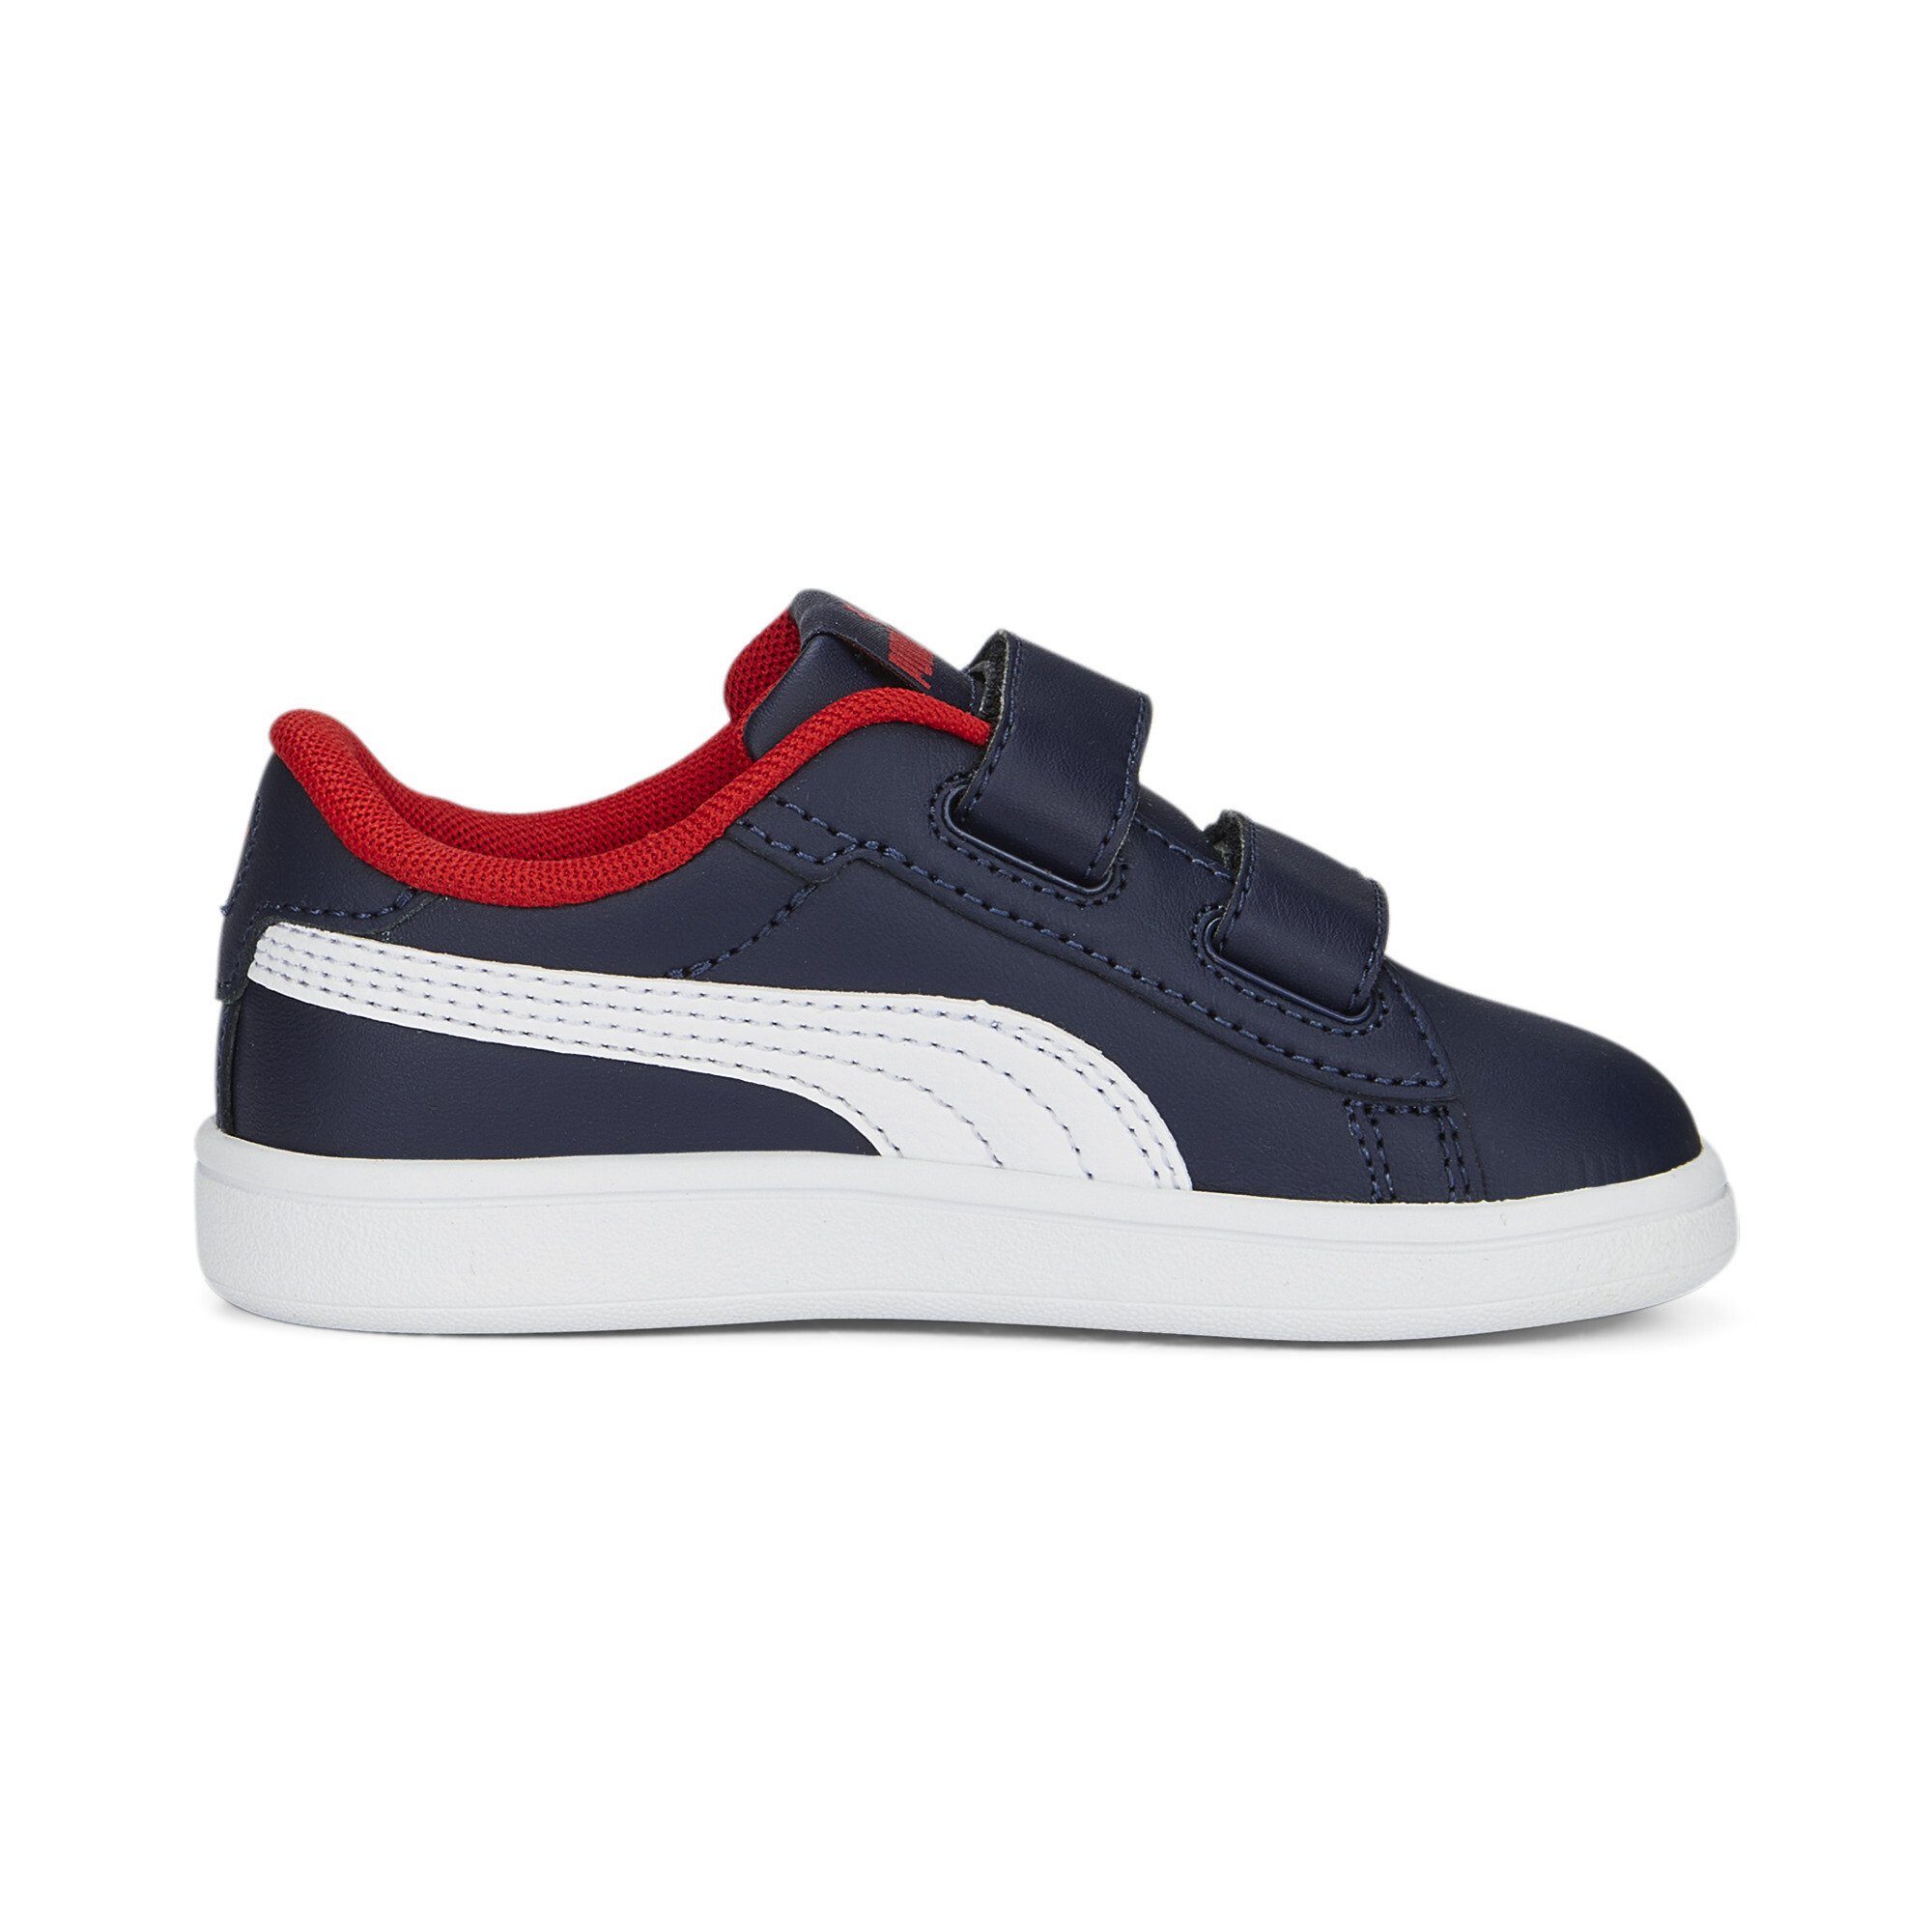 All Leather White For 3.0 Smash V PUMA Sneakers Sneaker Kinder Red Navy Time Blue